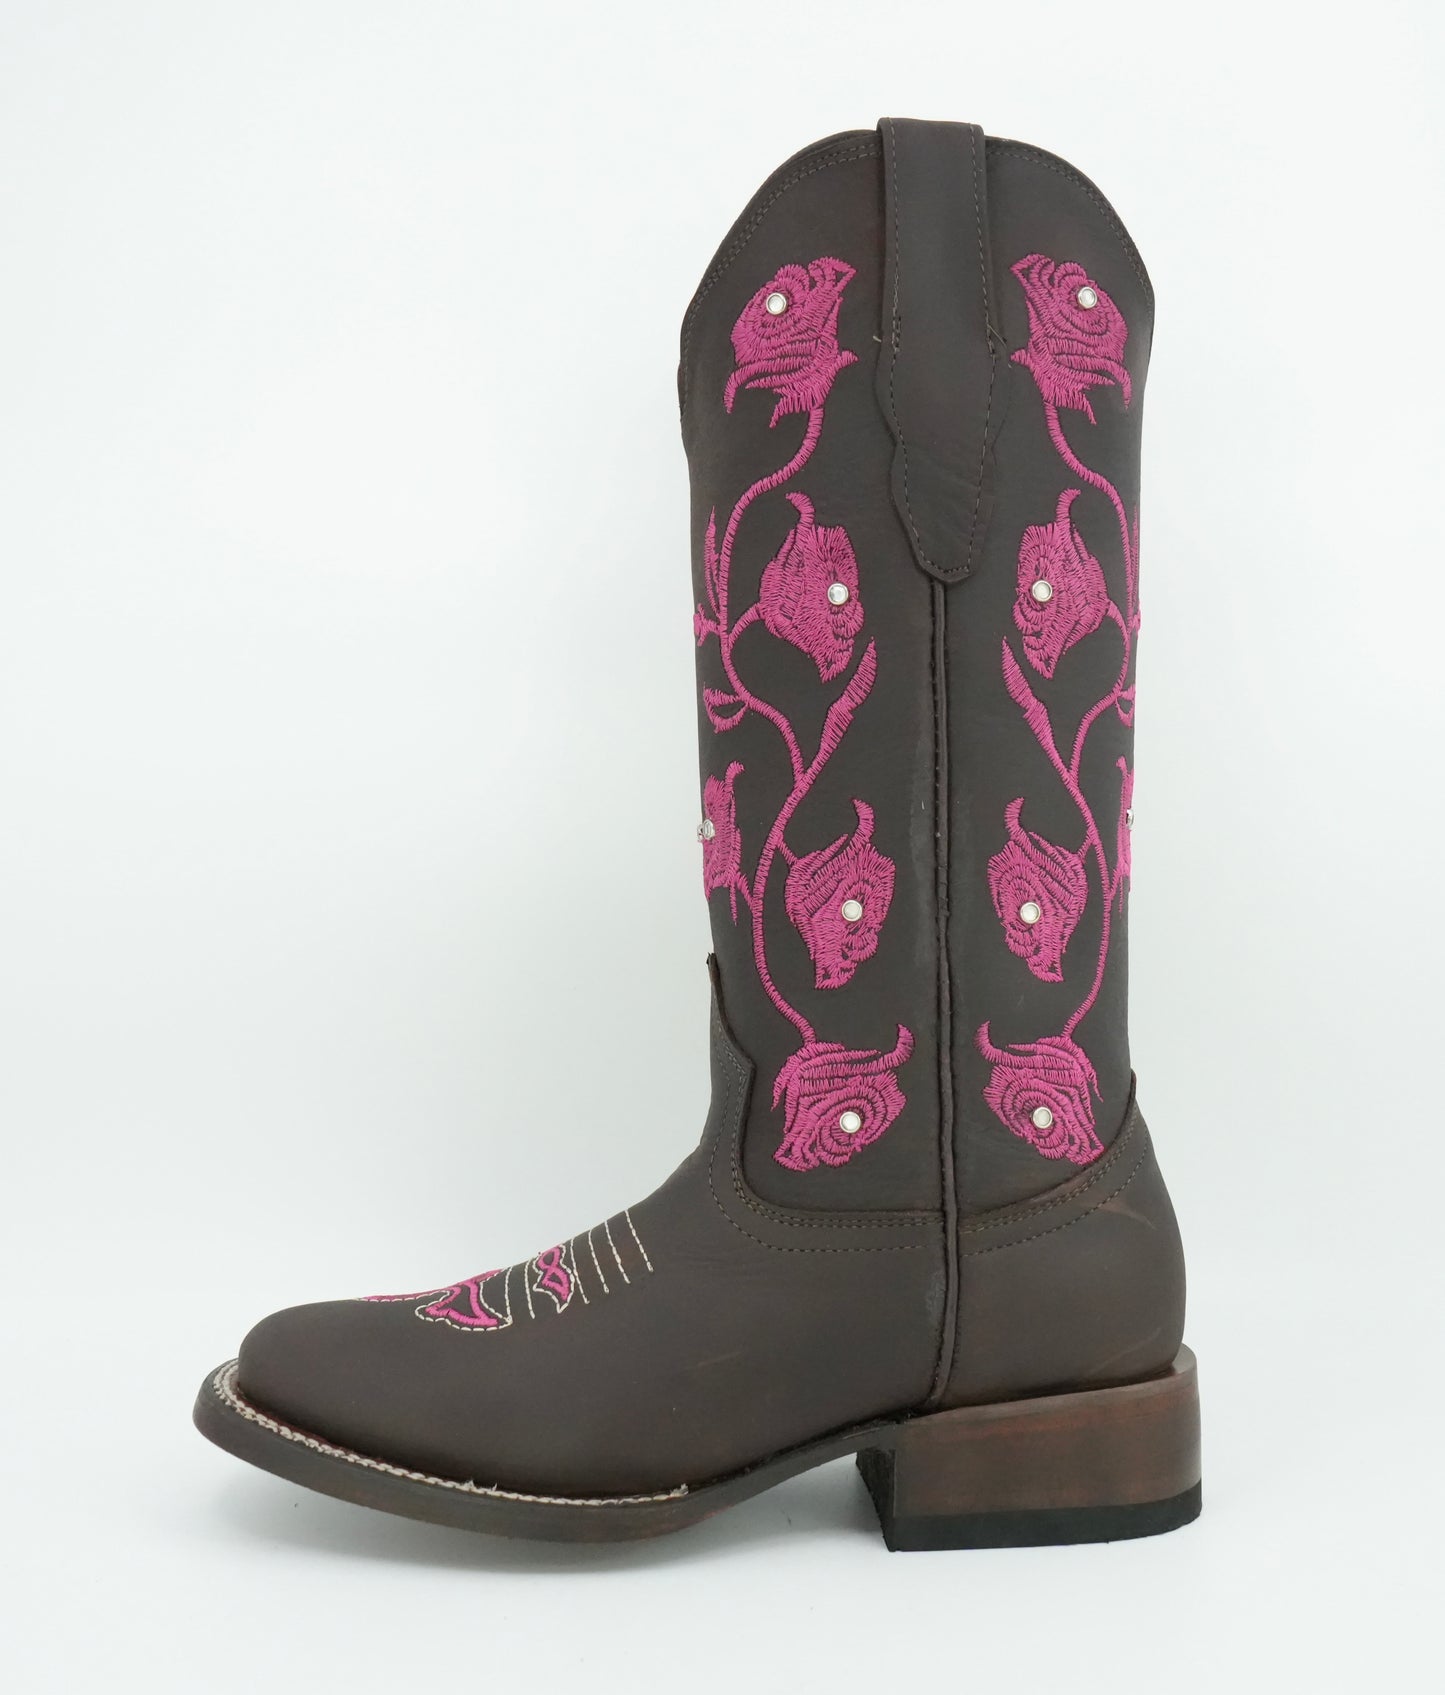 Quincy Women's Crazy Embroidered Brown/Pink Wide Square Toe Boot